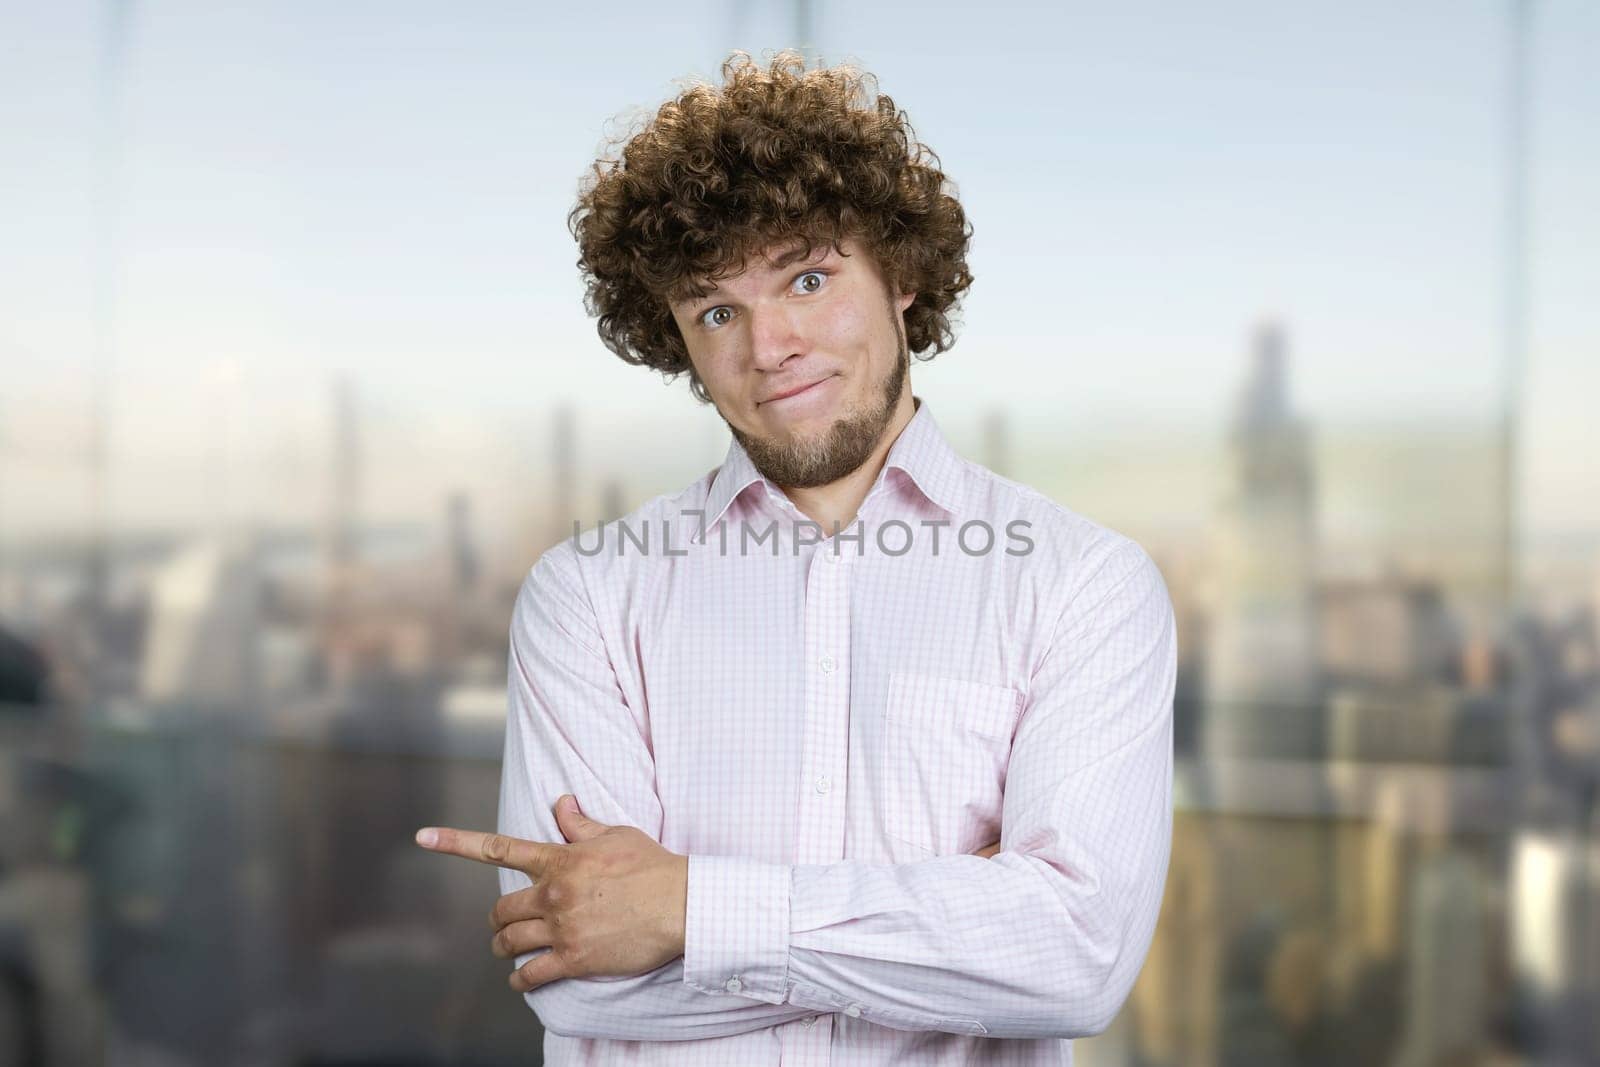 Portrait of a young man with curly hair pointing to the left with his index finger. Blurred cityscape in the background.